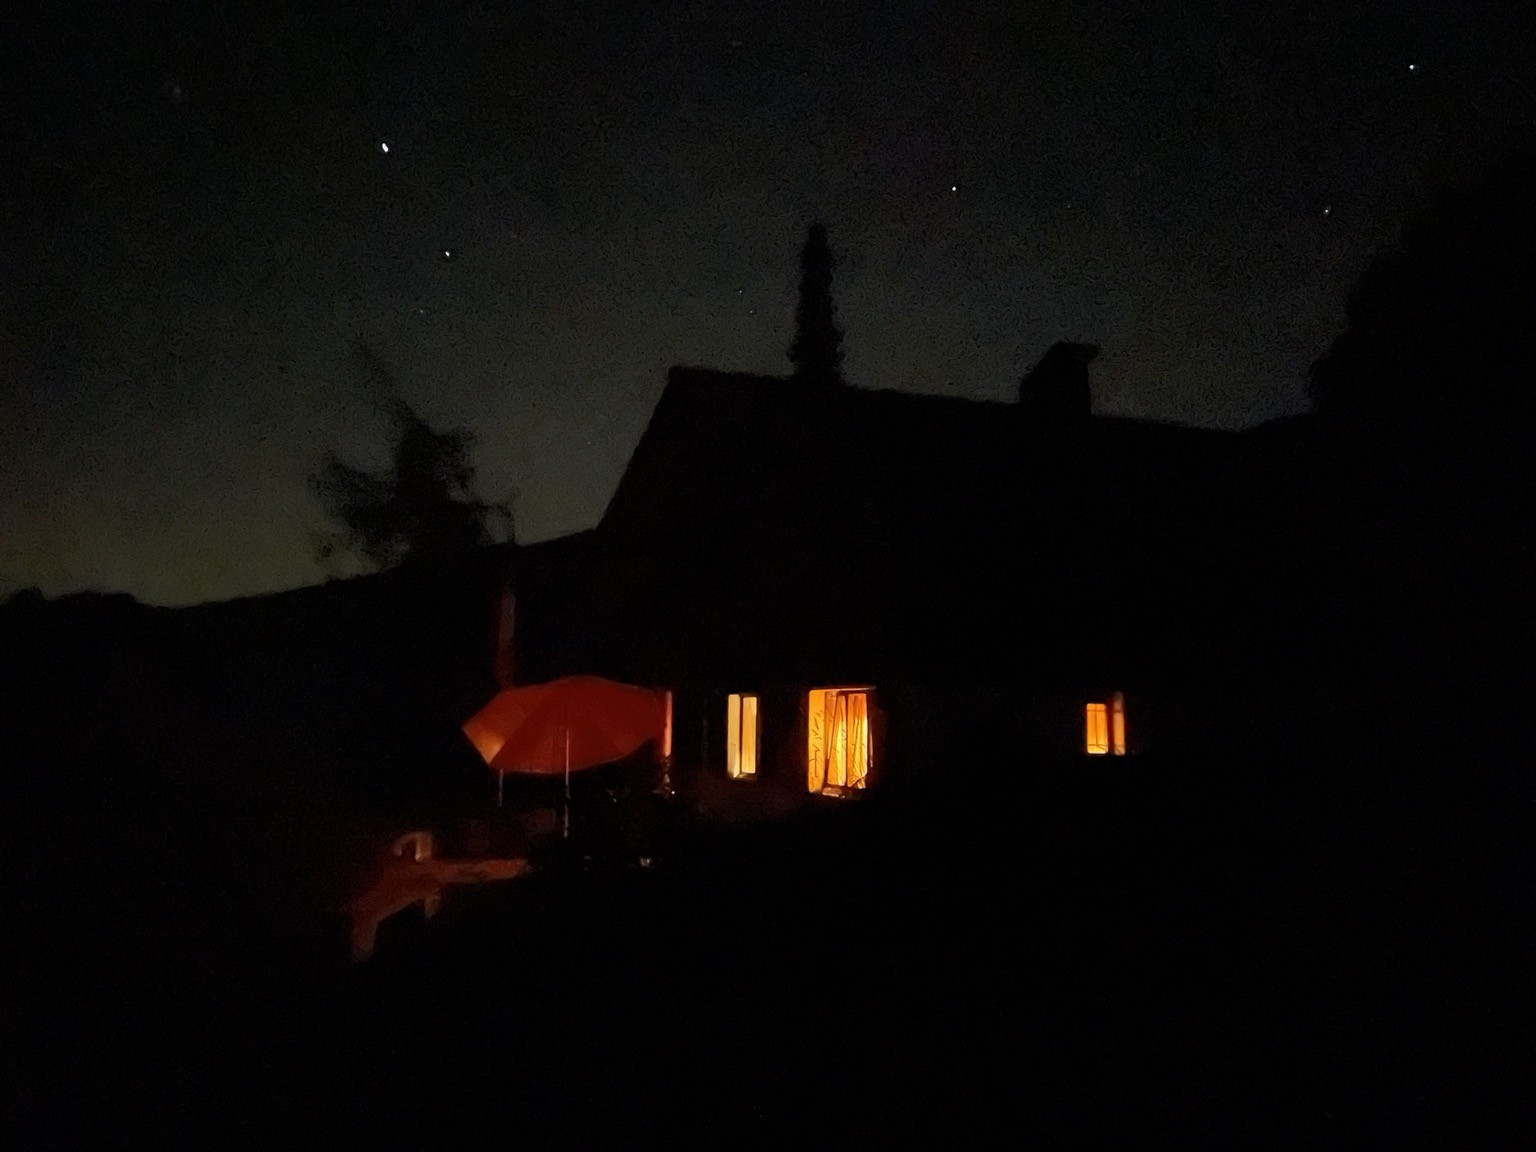 A house in the dark